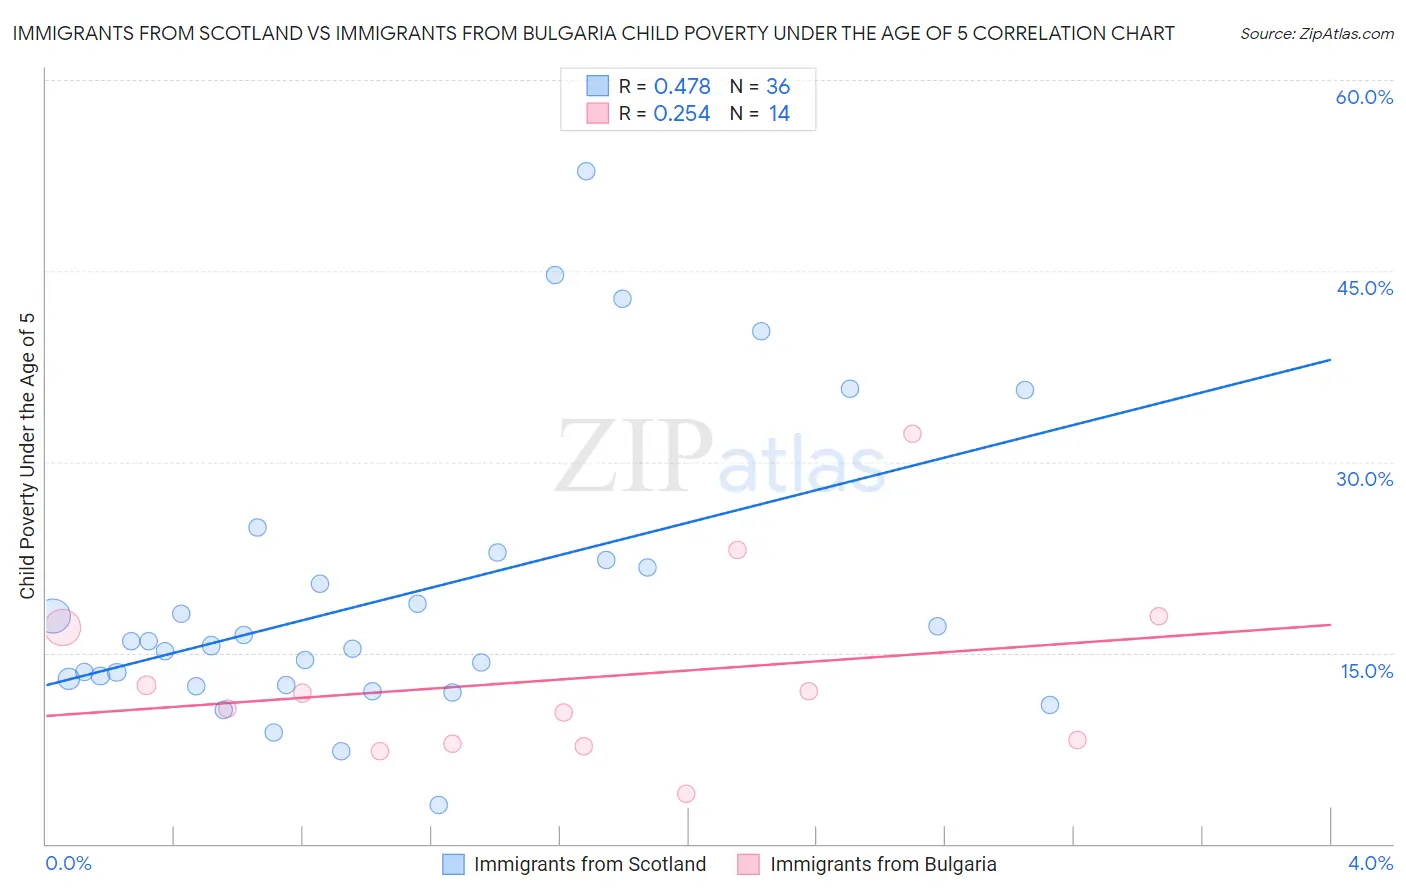 Immigrants from Scotland vs Immigrants from Bulgaria Child Poverty Under the Age of 5